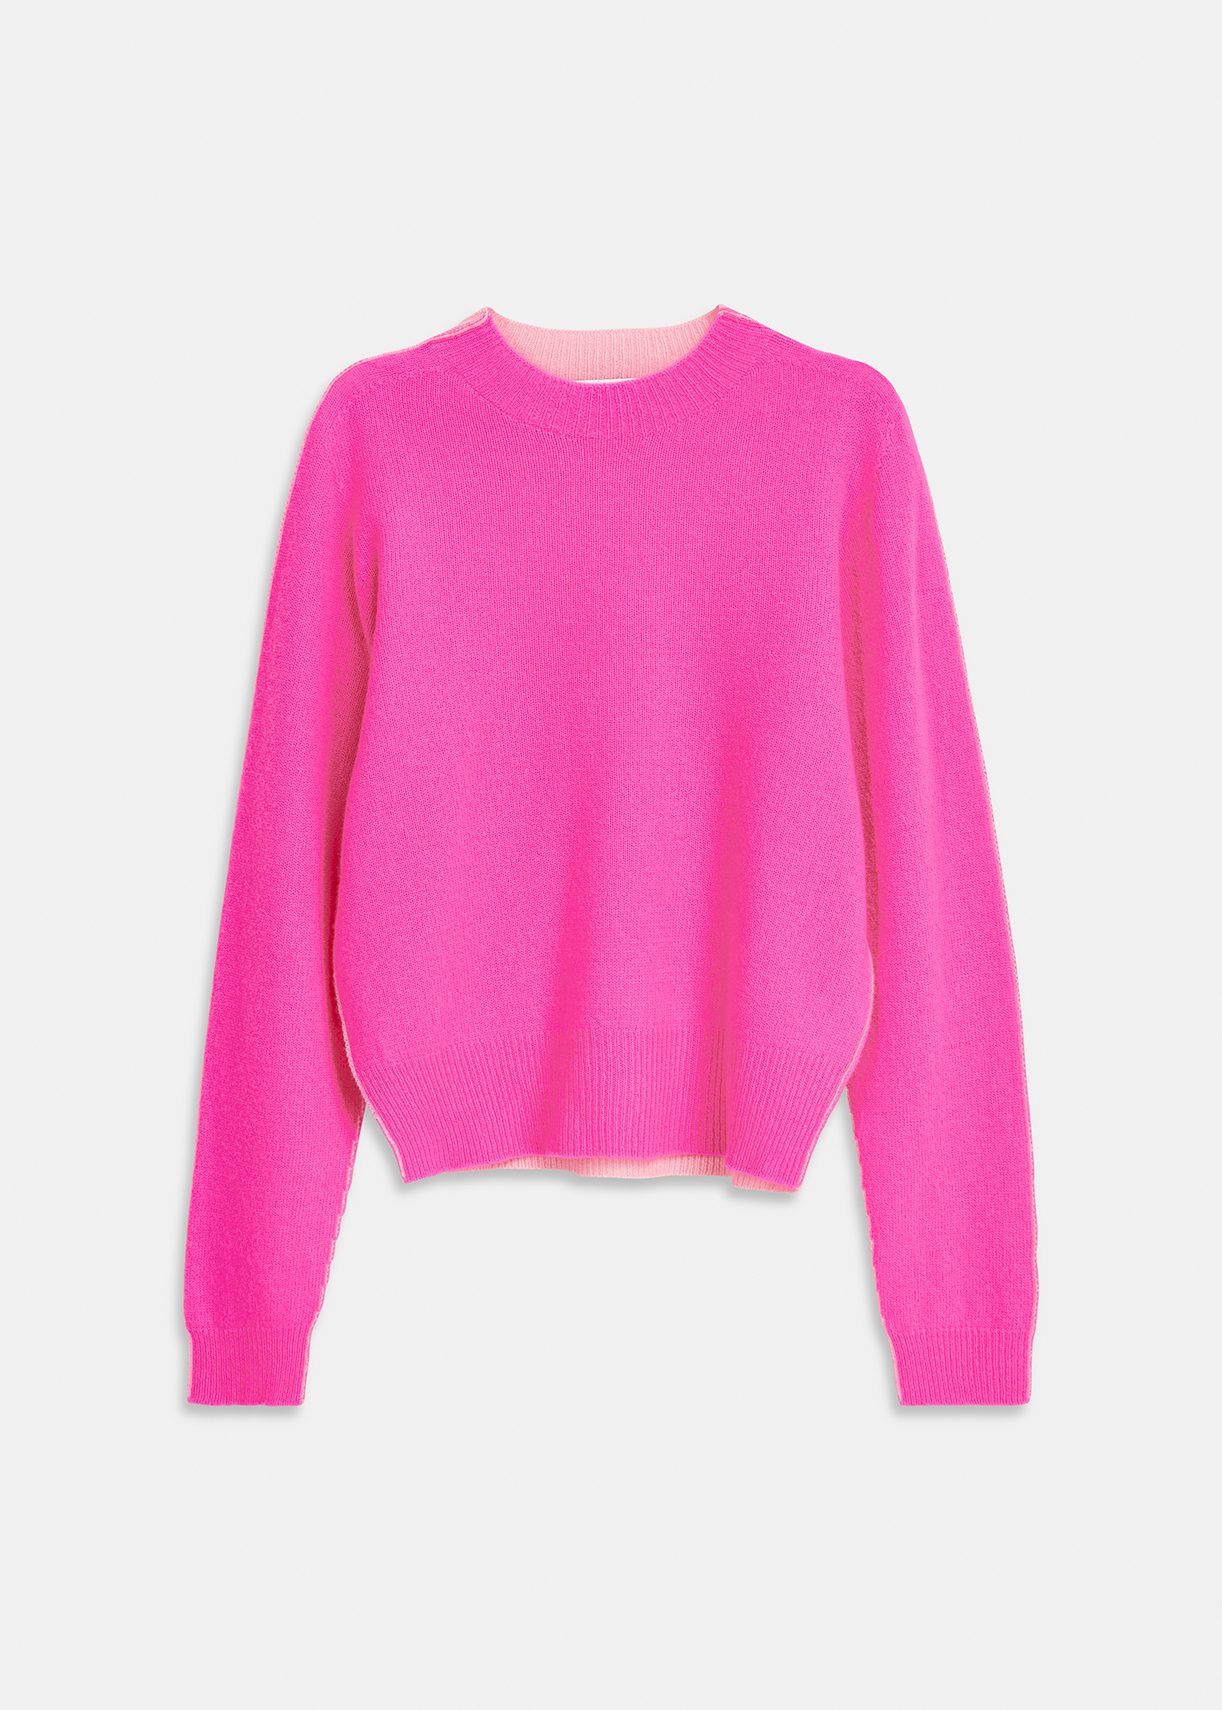 Trouva: Neon and Pale Pink Cama Sweater